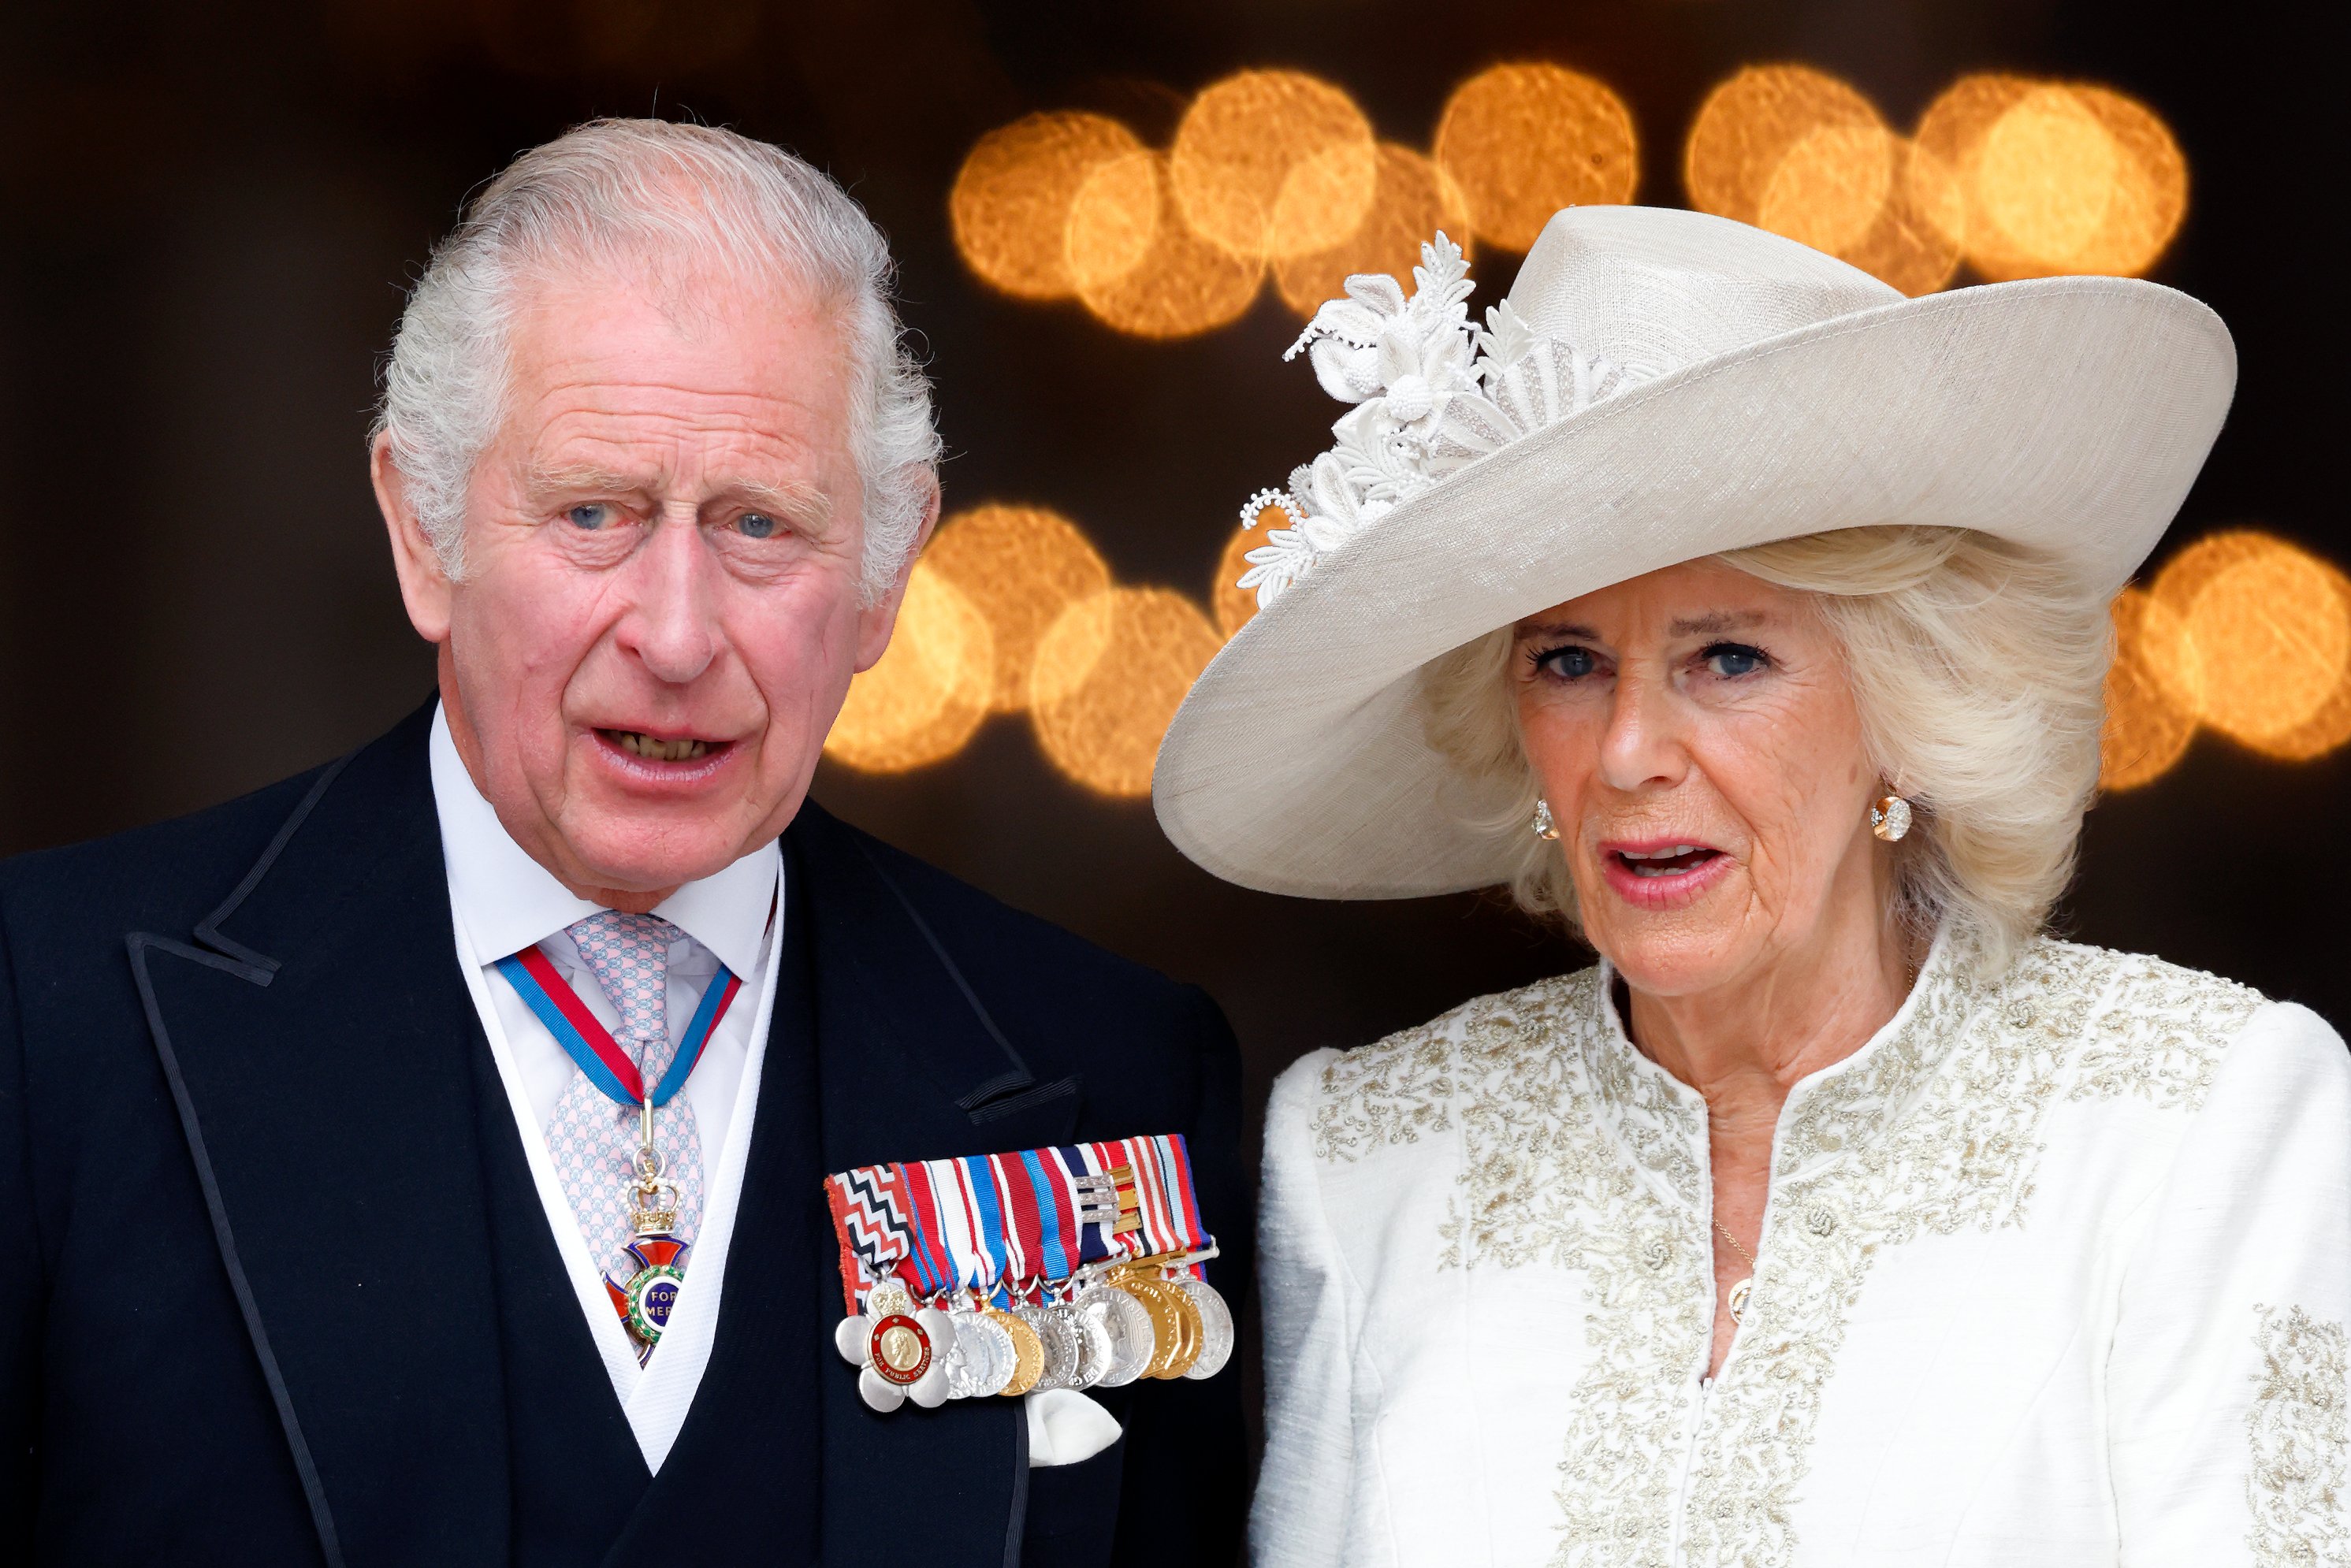     Prince Charles, Prince of Wales and Camilla, Duchess of Cornwall attend a National Service of Thanksgiving to celebrate Queen Elizabeth II's Platinum Jubilee at St Paul's Cathedral on June 3, 2022 in London, England.  |  Source: Getty Images